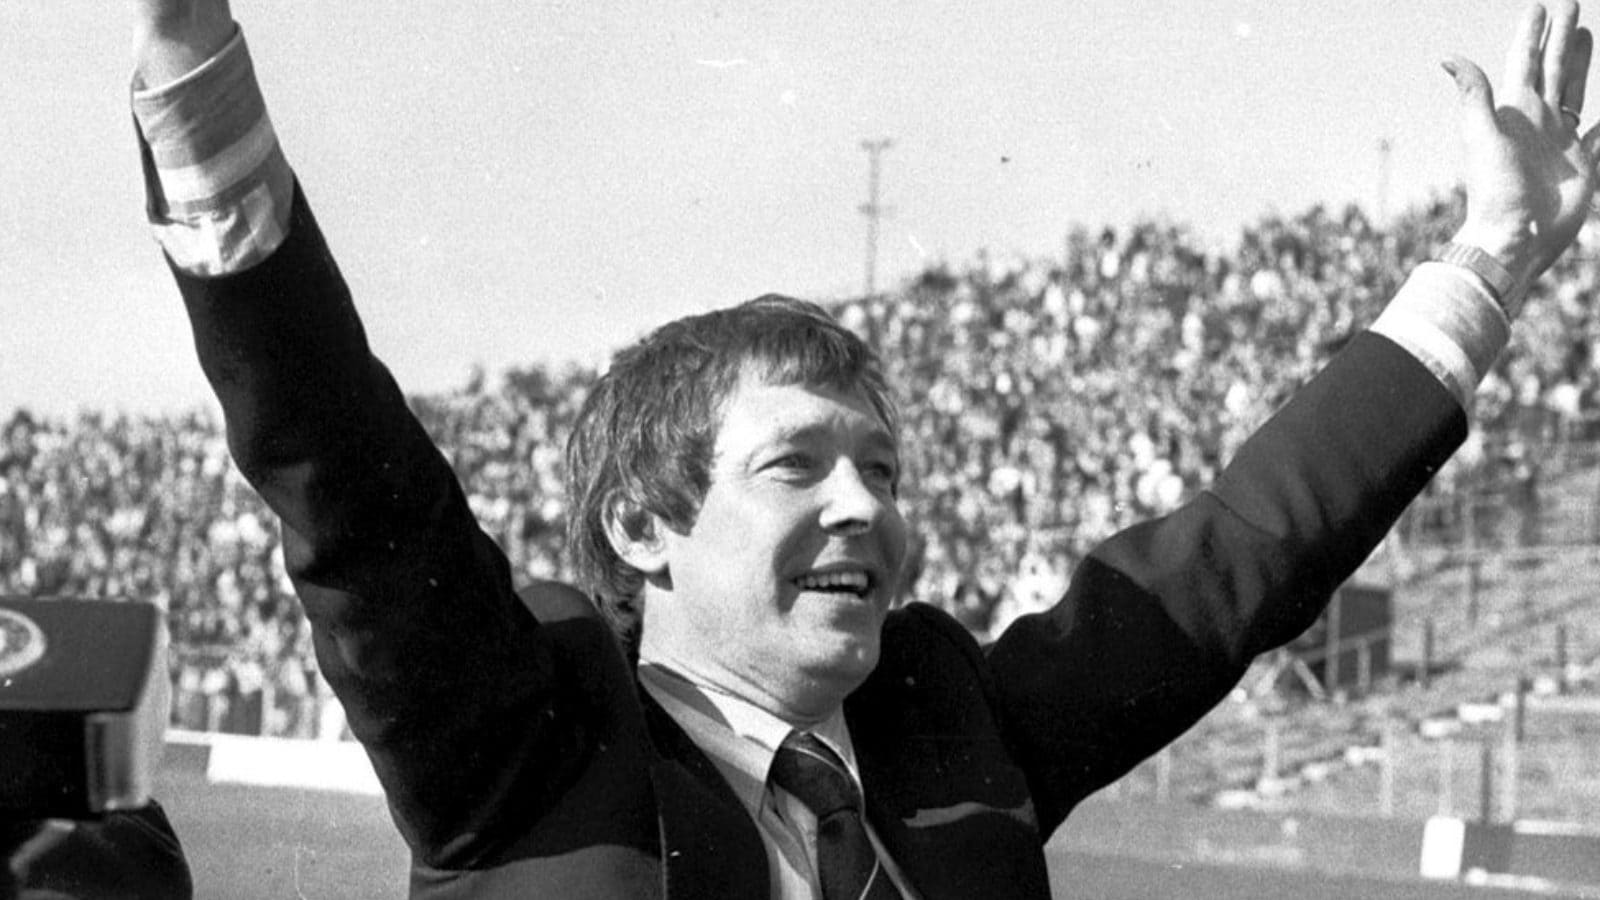 Aberdeen to Honour Former Manager Alex Ferguson with Statue at Stadium